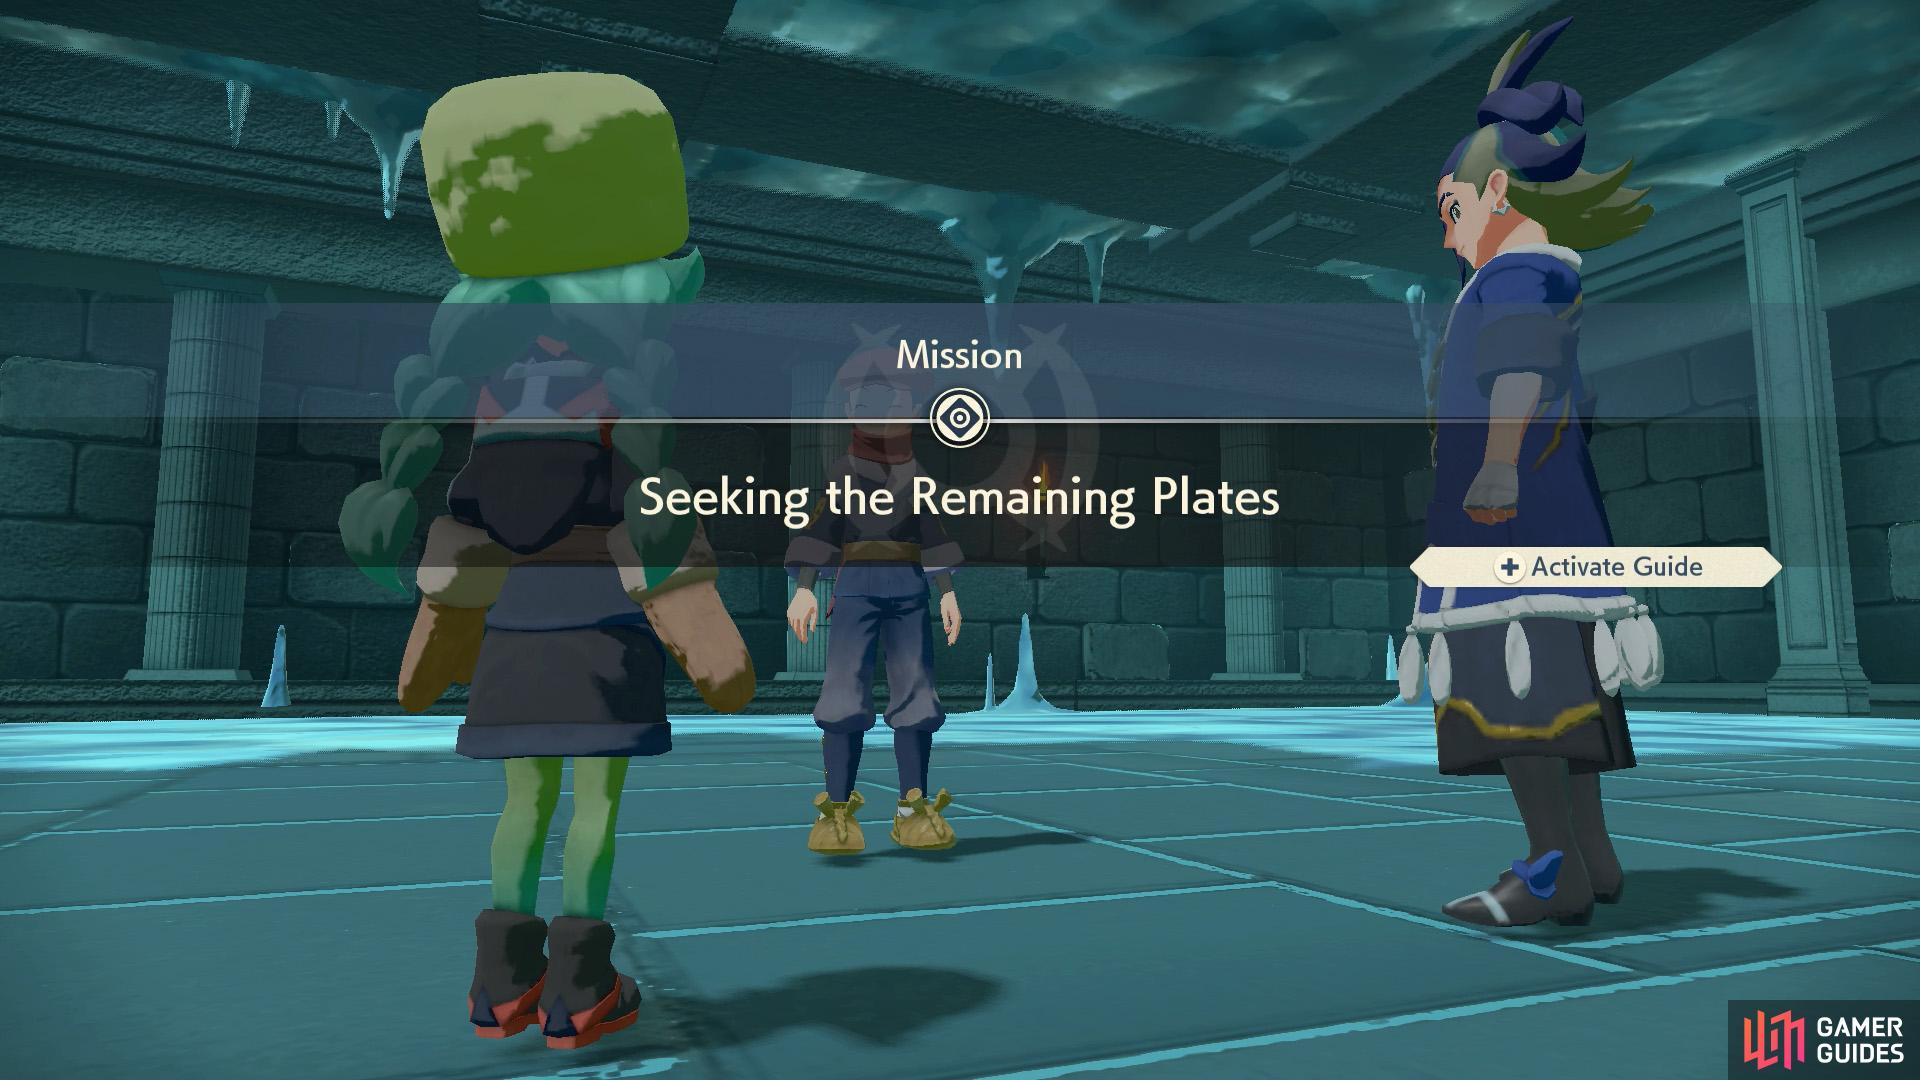 You'll receive this mission after collecting the 5 plates from Cogita's hints.